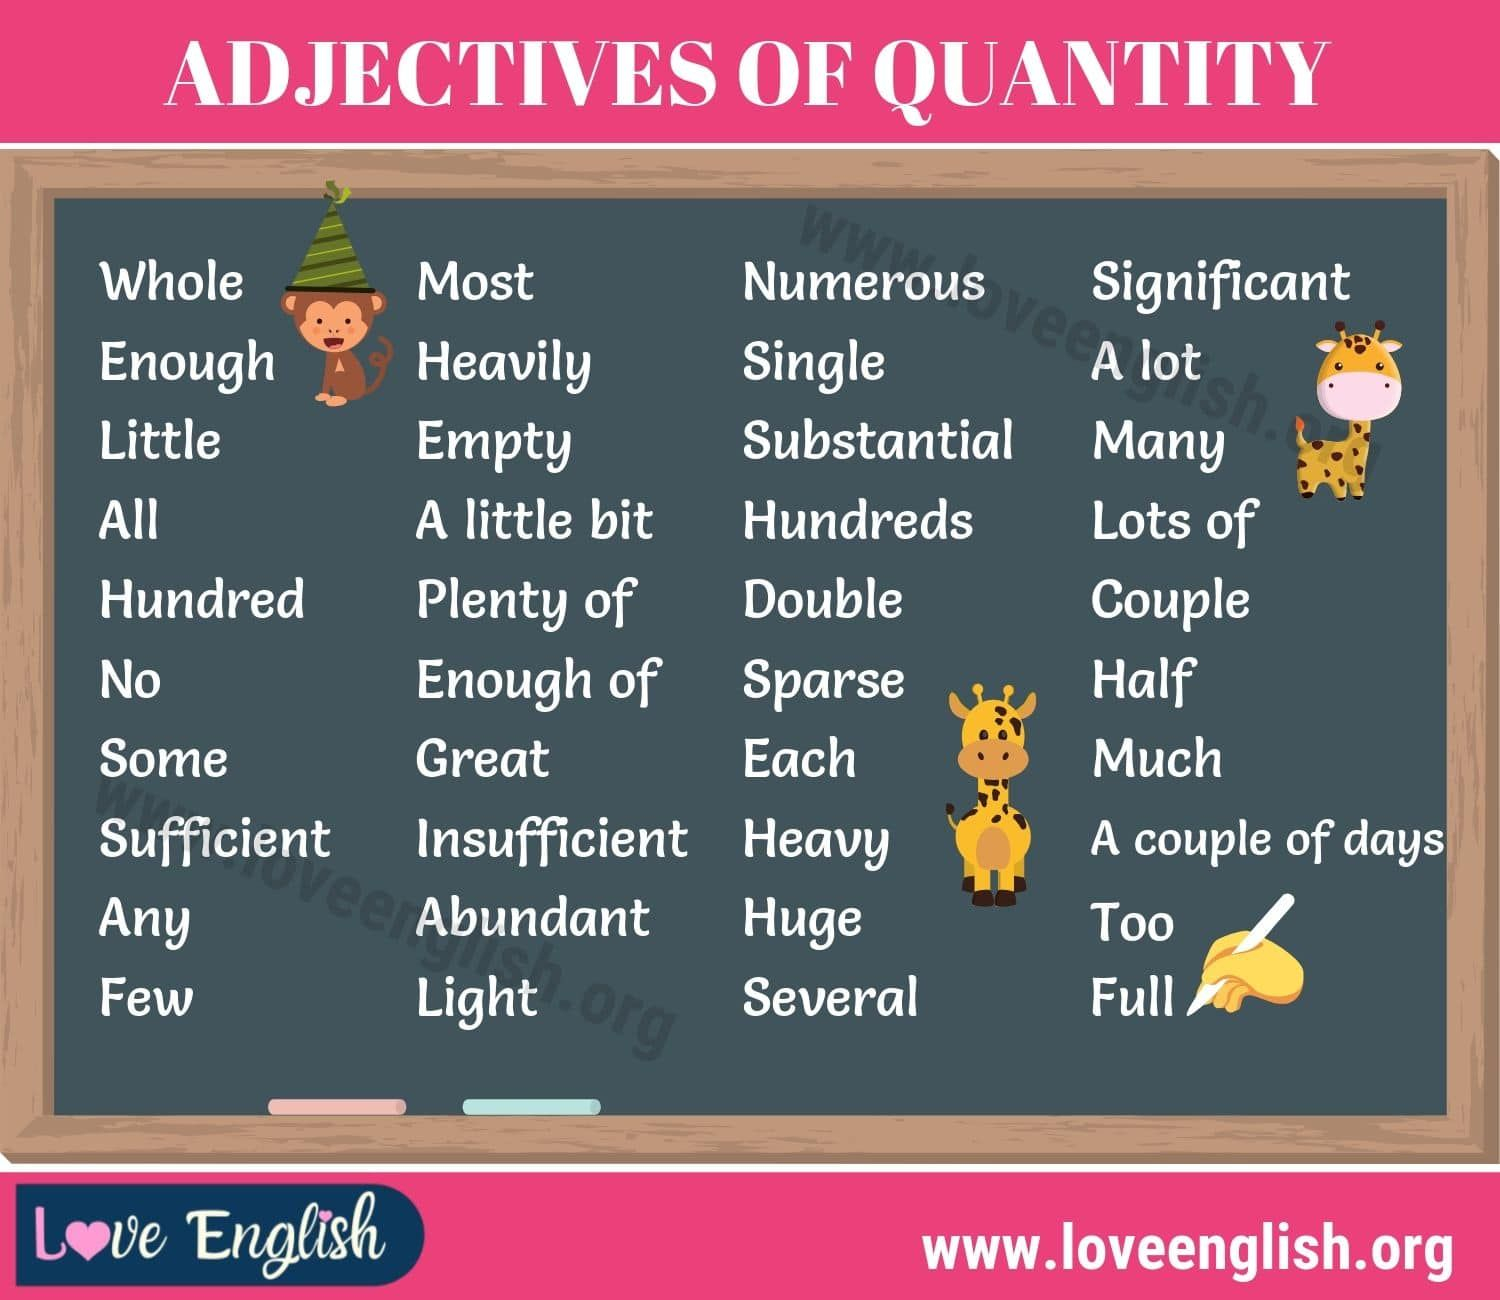 adjective-and-its-types-download-pdf-vocabulary-point